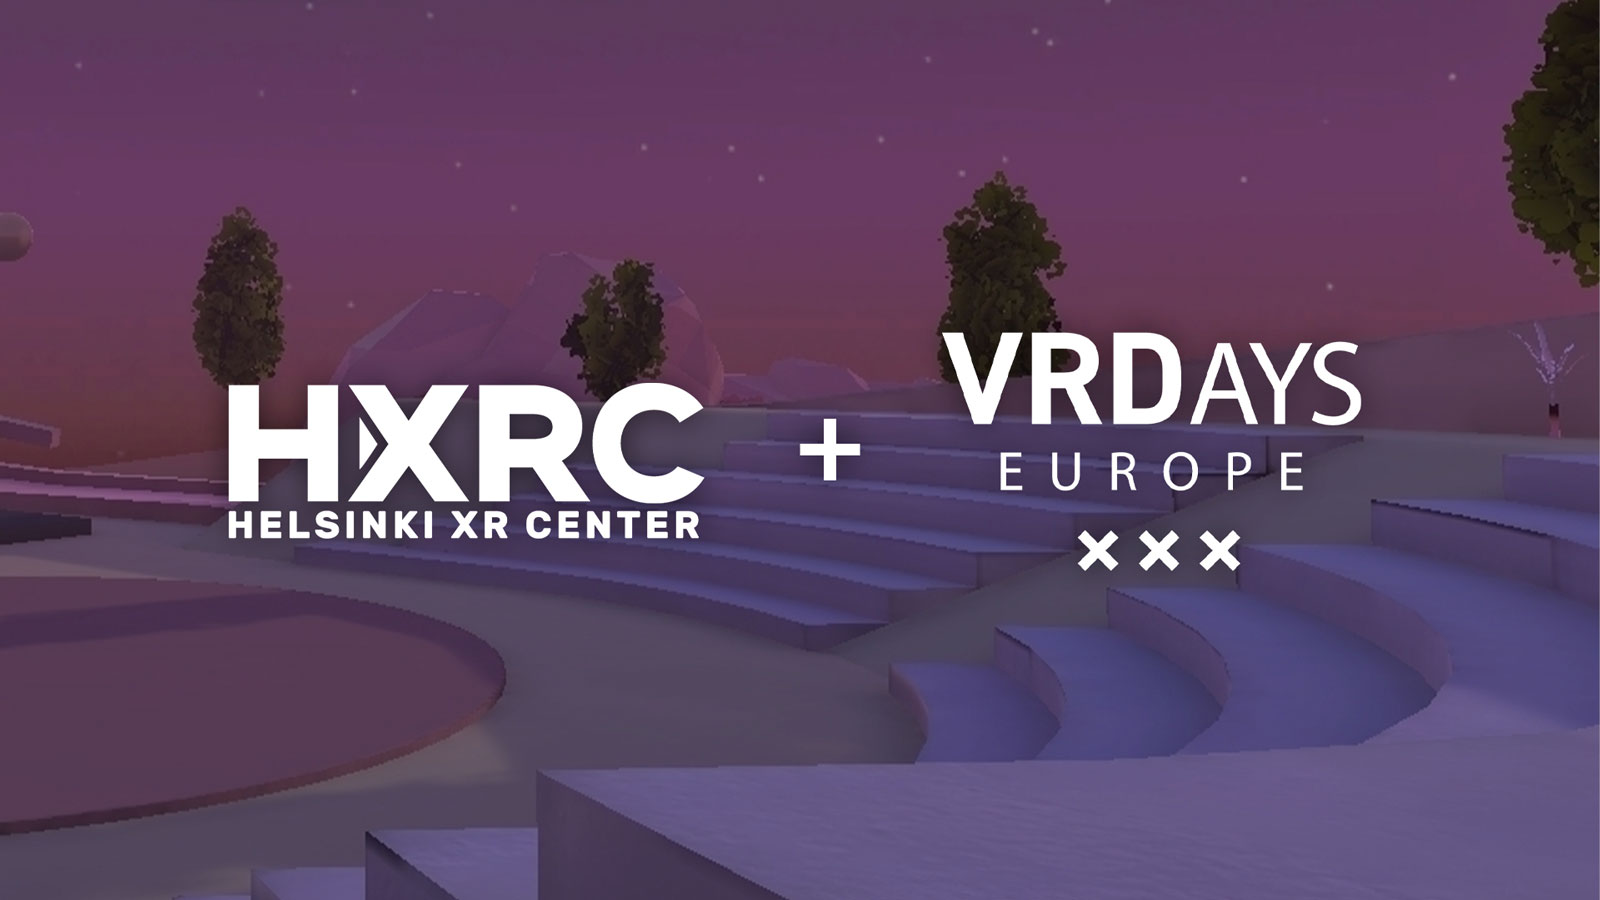 Lilac amphitheater made in VR environnment, with Helsinki XR Center and VRDays Europe logos overlaid.